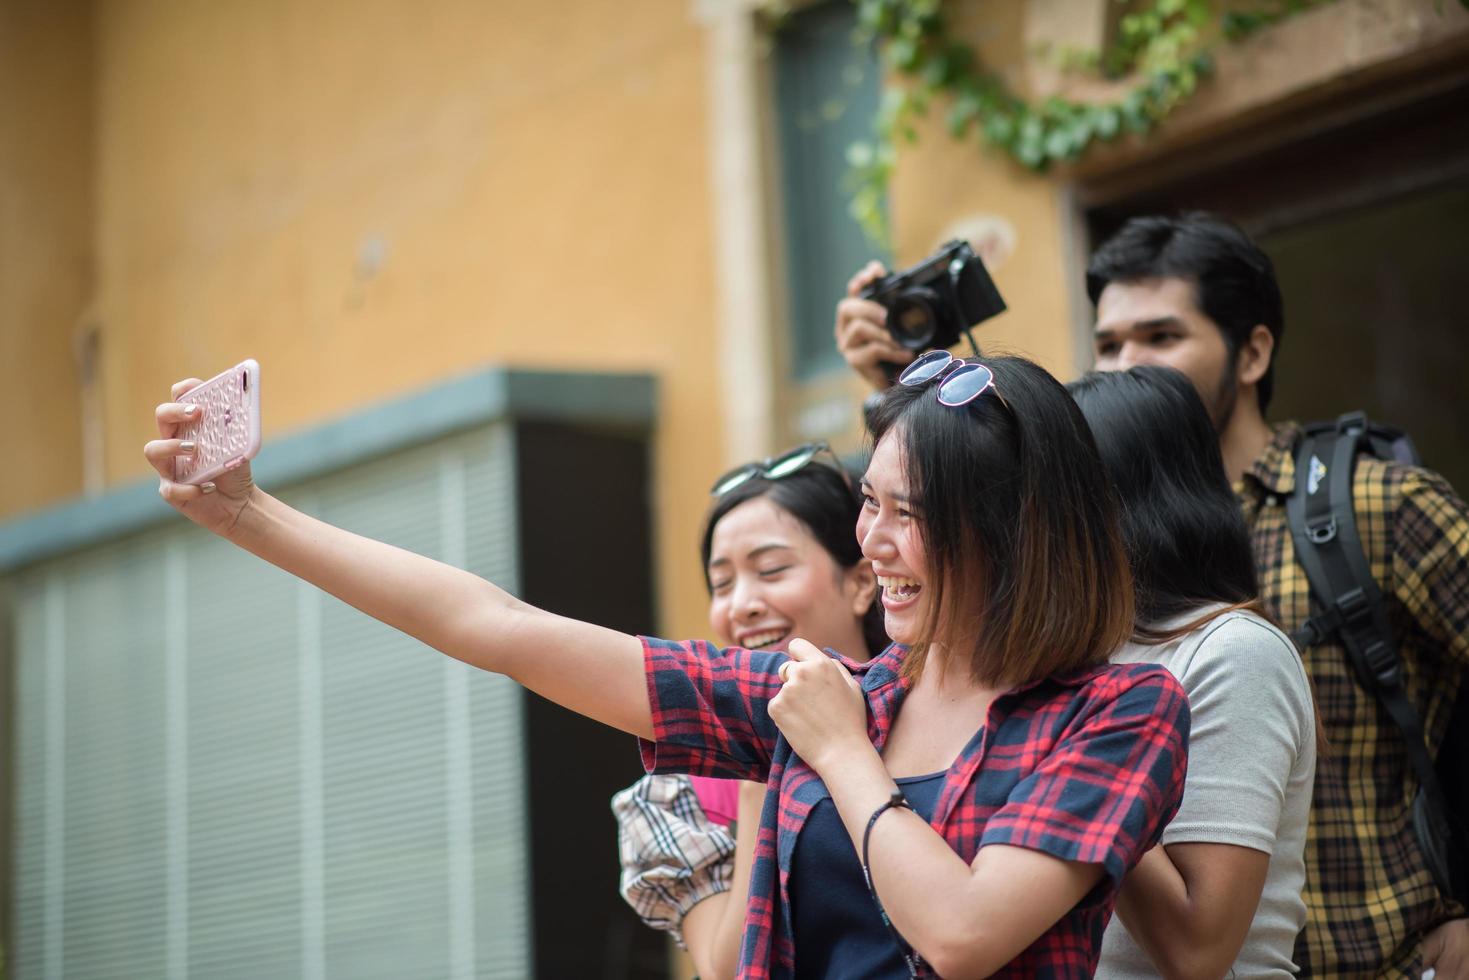 Group of friends taking a selfie in an urban street having fun together photo